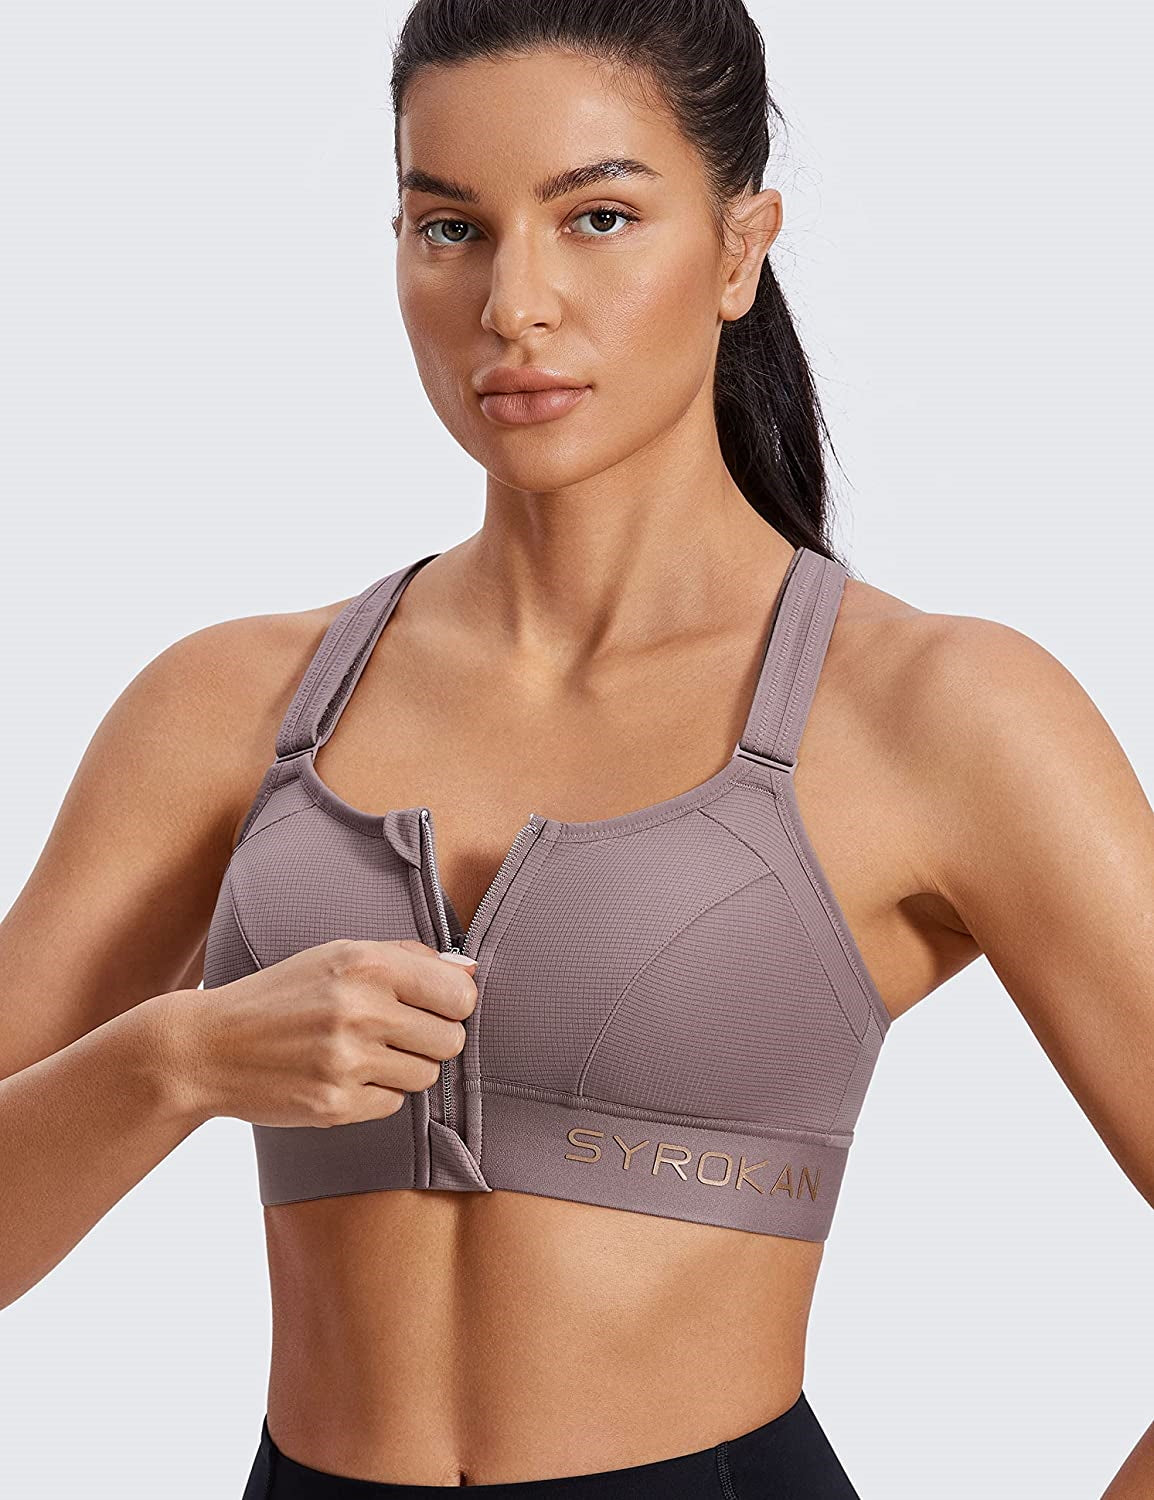 SYROKAN High Impact Sports Bras for Women Underwire High Support Racerback  No Bounce Workout Fitness Gym Mist Grey 38D